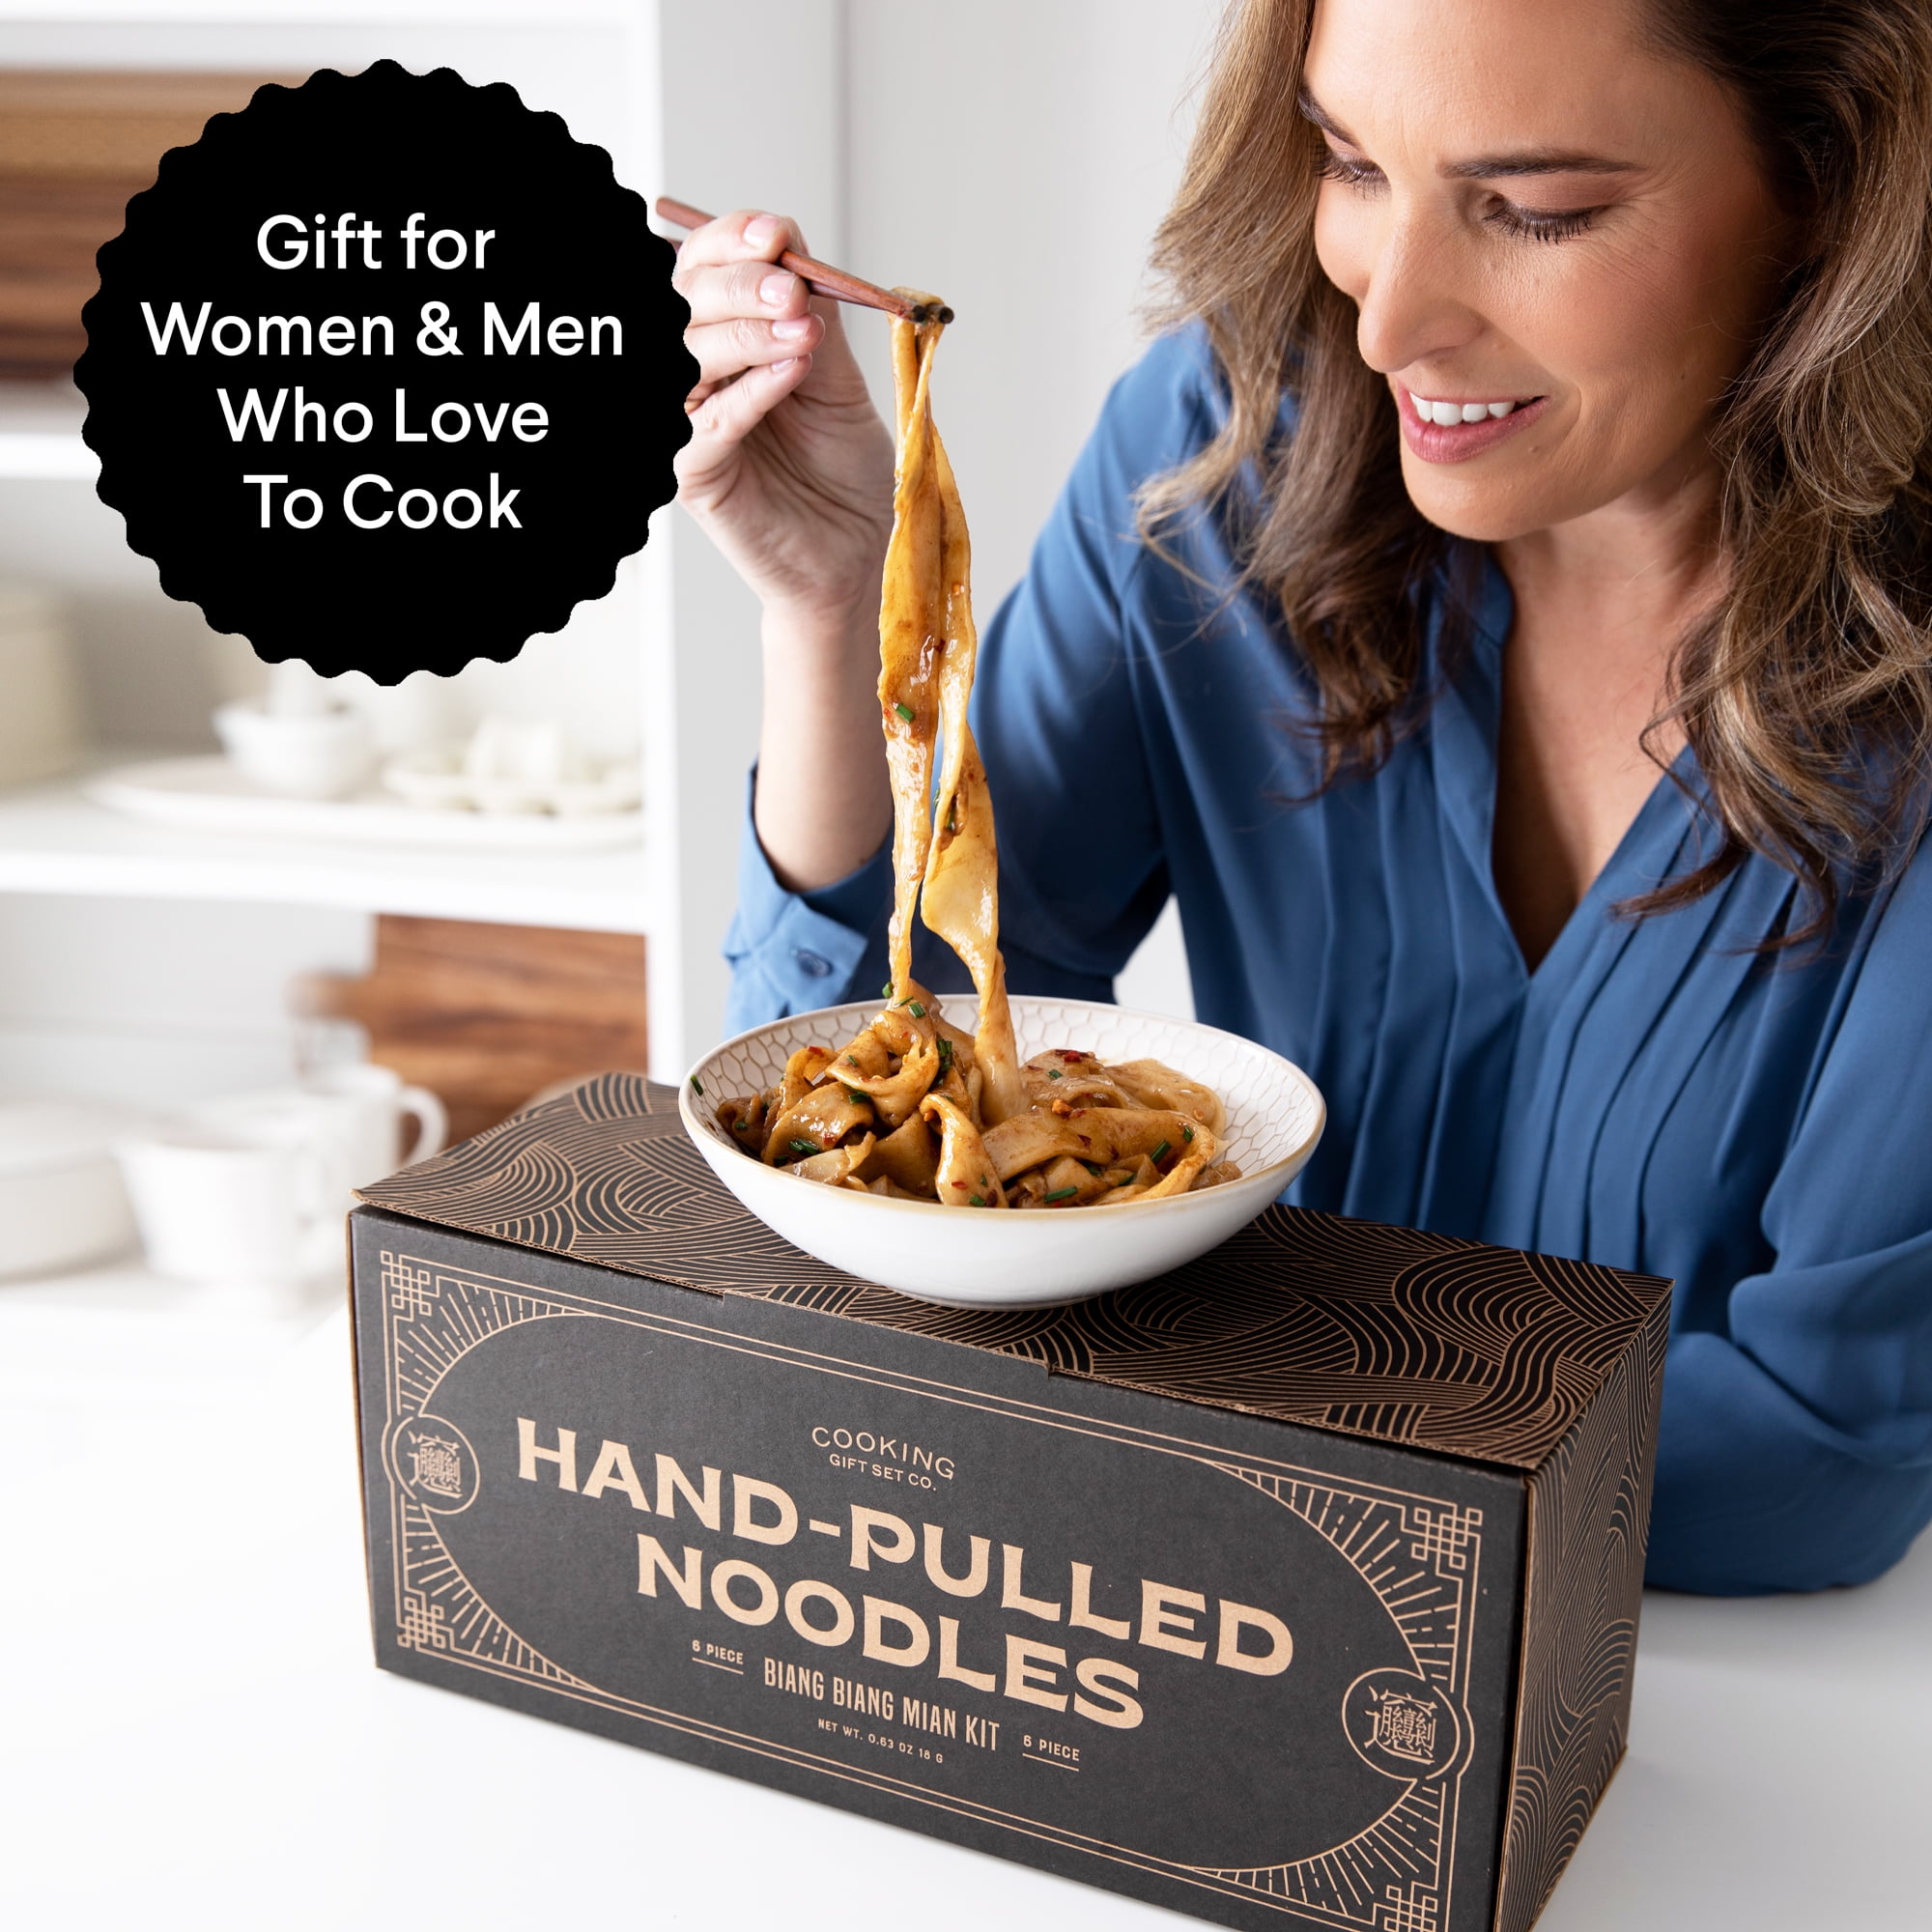 Cooking Gift Set Co. | Hand-Pulled Noodles Kit | Unique Gifts for Cooks, Foodie Gifts for Friends, Cooking Gifts for Mom | Top-Notch Kitchen